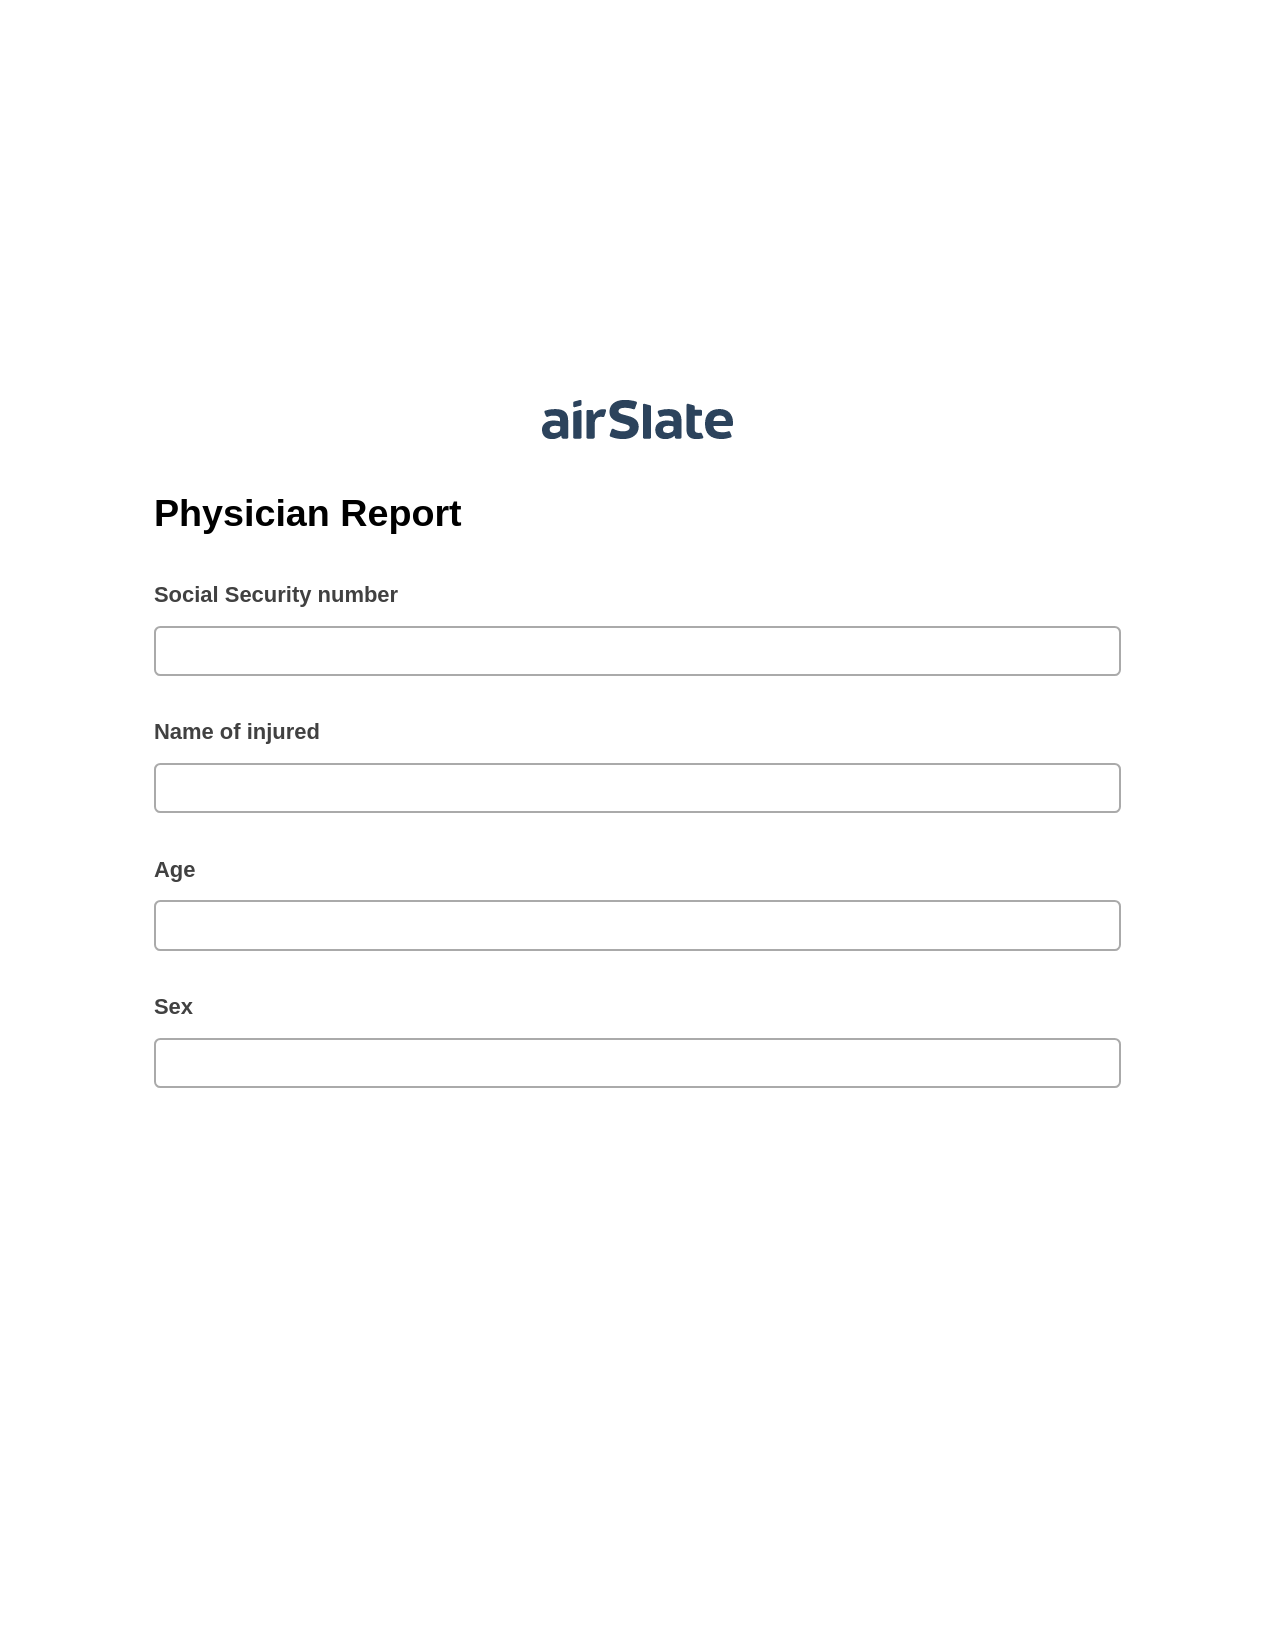 Multirole Physician Report Pre-fill from Excel Spreadsheet Bot, Invoke Salesforce Process Bot, Post-finish Document Bot